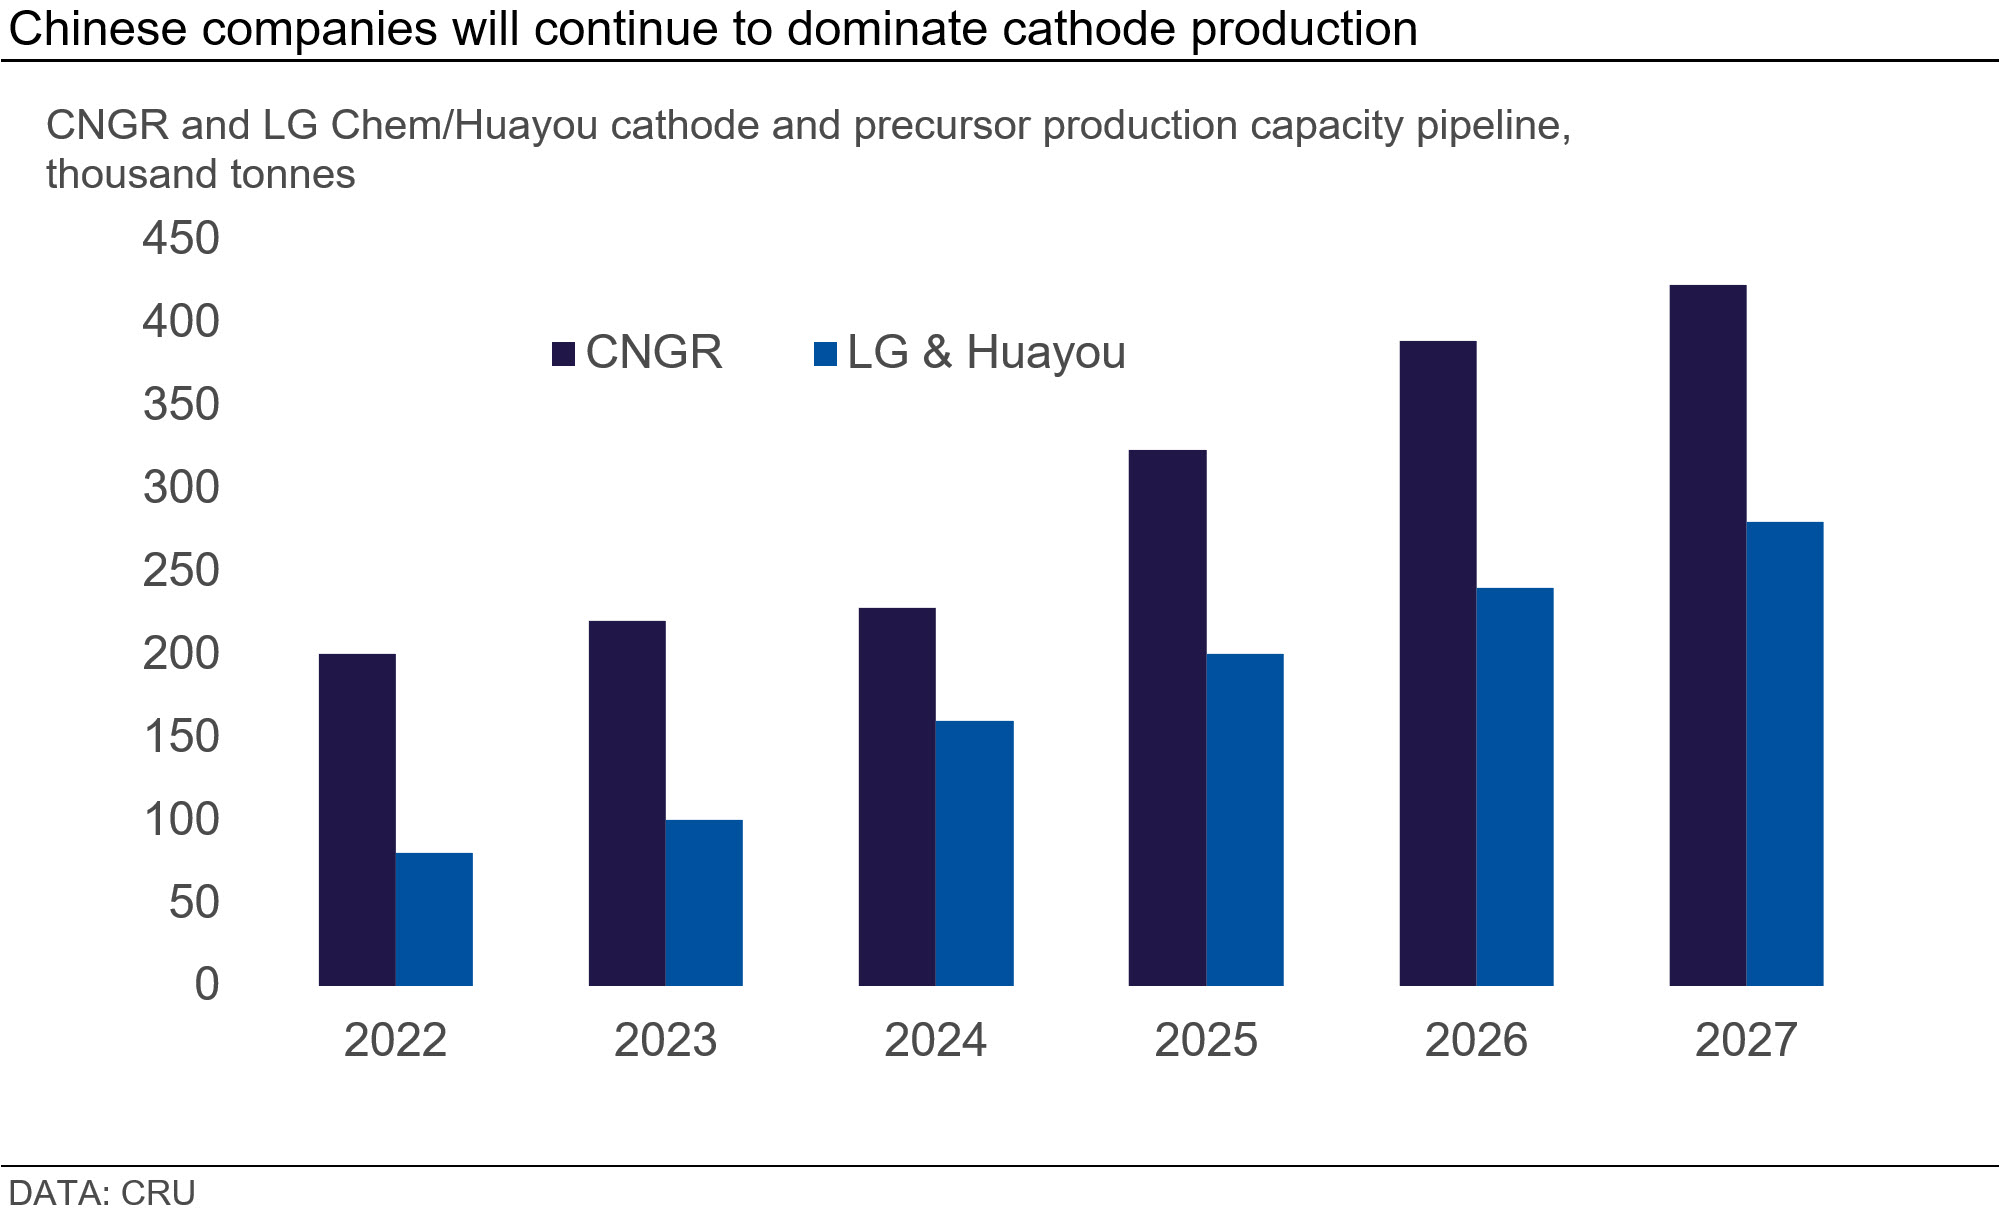 Graph show that Chinese companies will continue to dominate cathode production